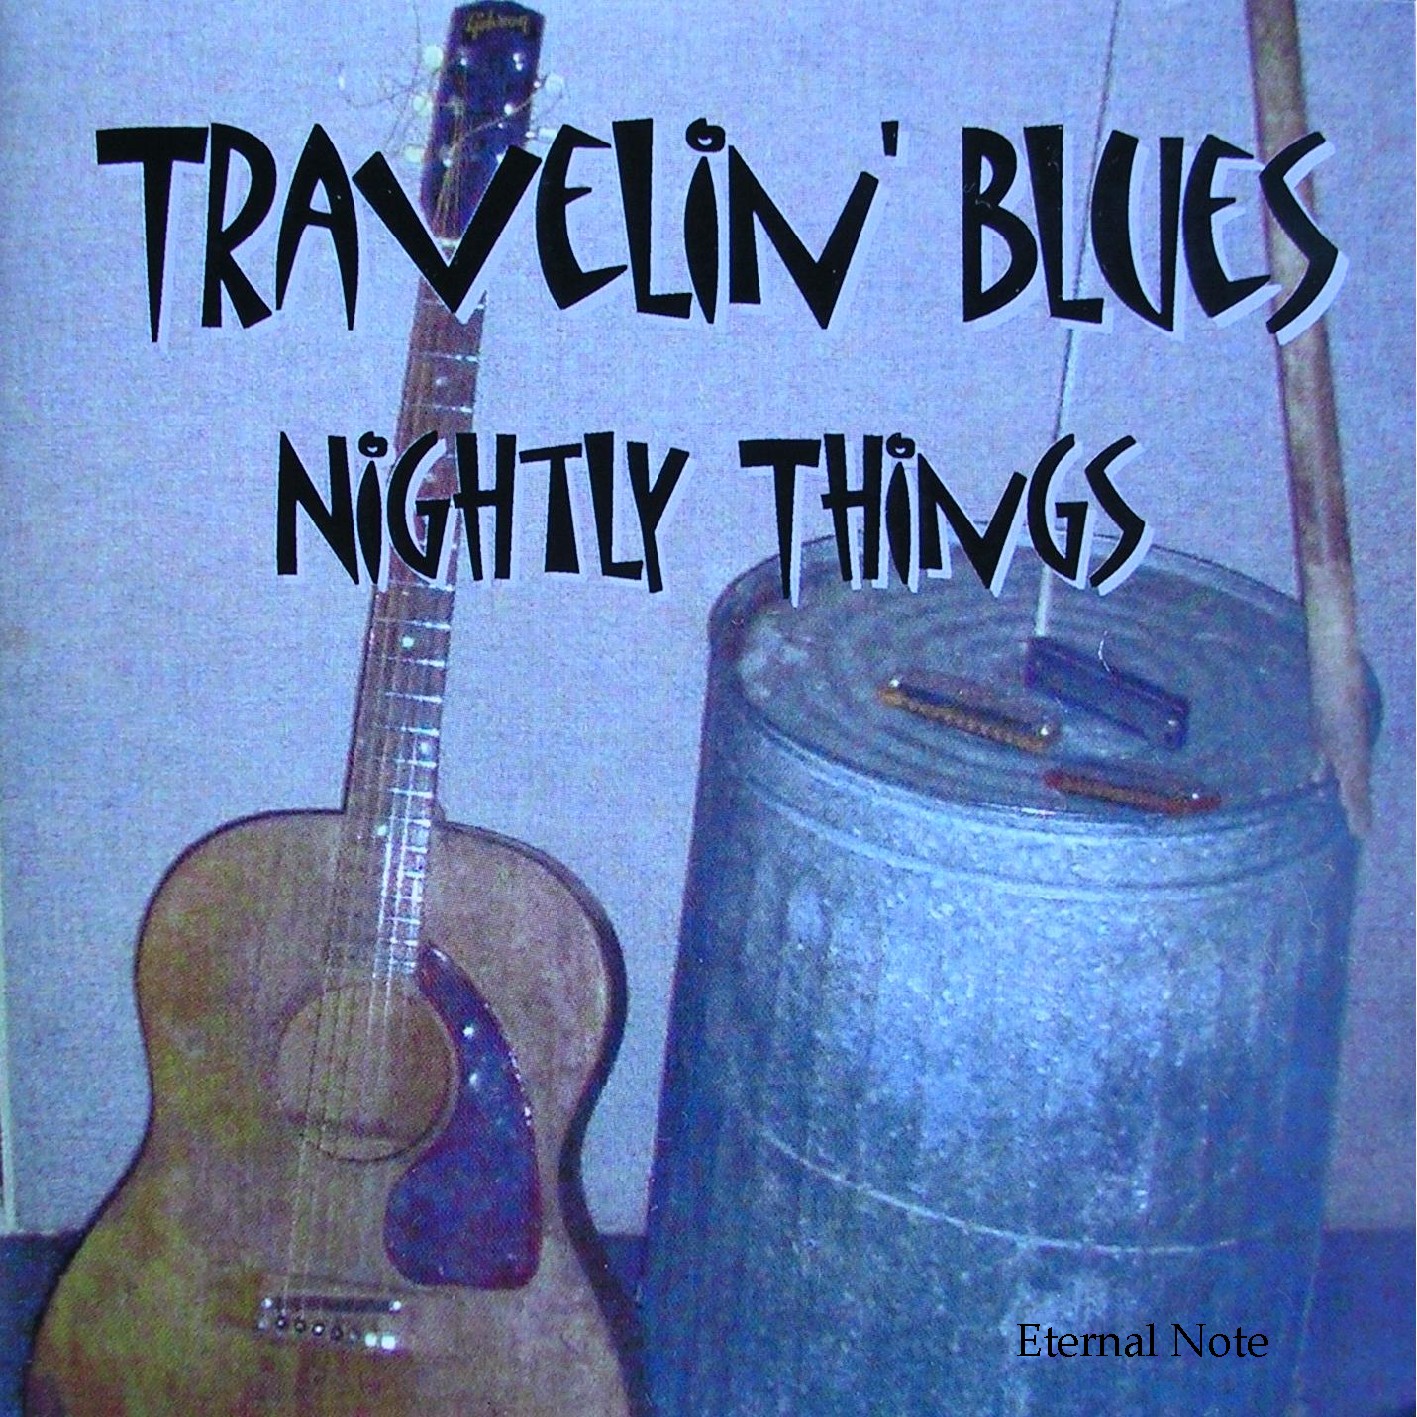 Nightly Things includes: Born By The River, Nightly Things,Ghetto Woman, Rainy Night In Georgia, Louisiana Blues, Gutbucket Boogie, Sweet You, She Gone, That Means So Much To Me, Hambone, Tin Pan Alley, Trouble In Mind, Voodoo Chile 